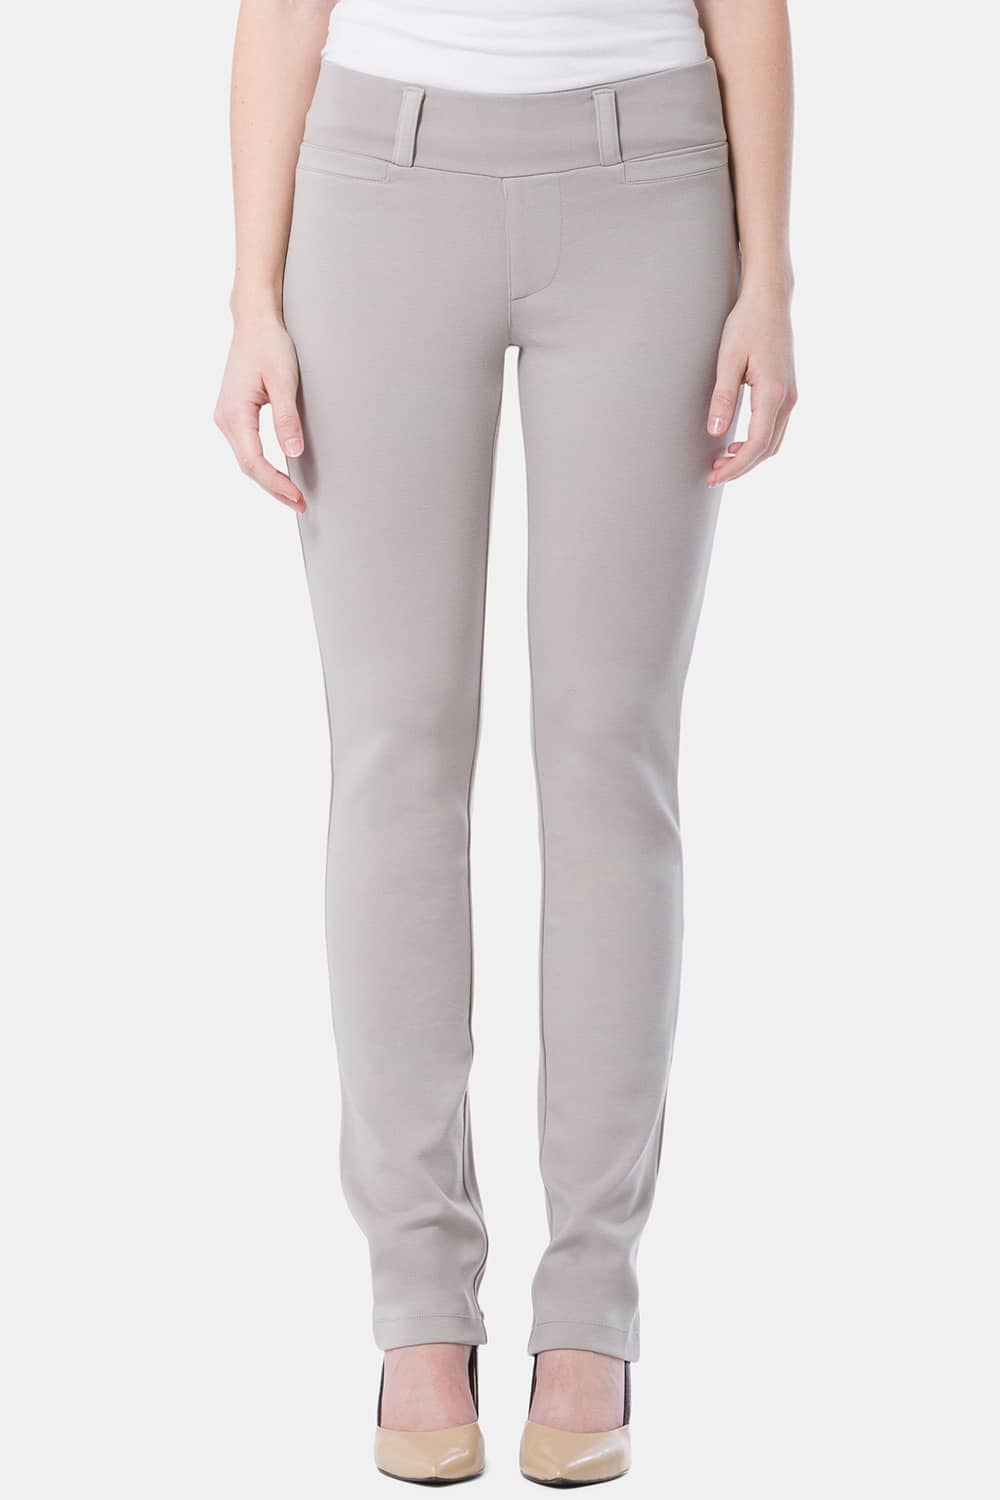 Women's Ponte Knit Pull-On Slim Straight Leg Work Pant - NEW & IMPROVED FIT Womens>Pants Fishers Finery Gray Sky X-Small Petite